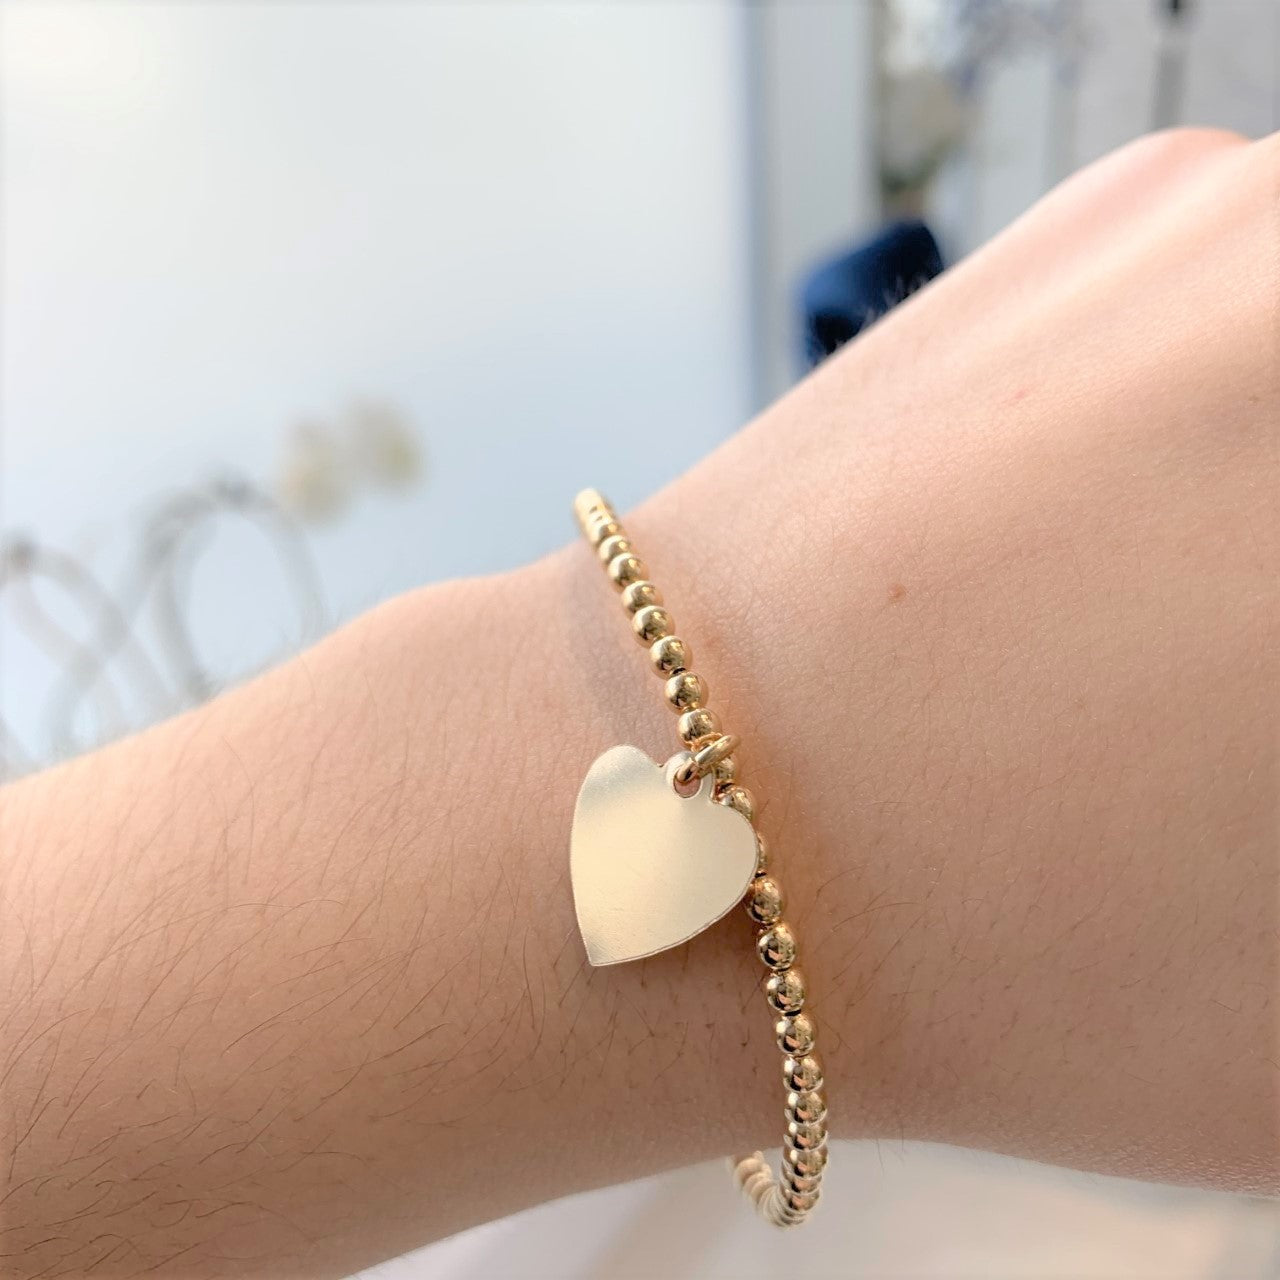 Engravable Heart - 14k Yellow Gold filled with Sterling Silver Stretch Bracelet